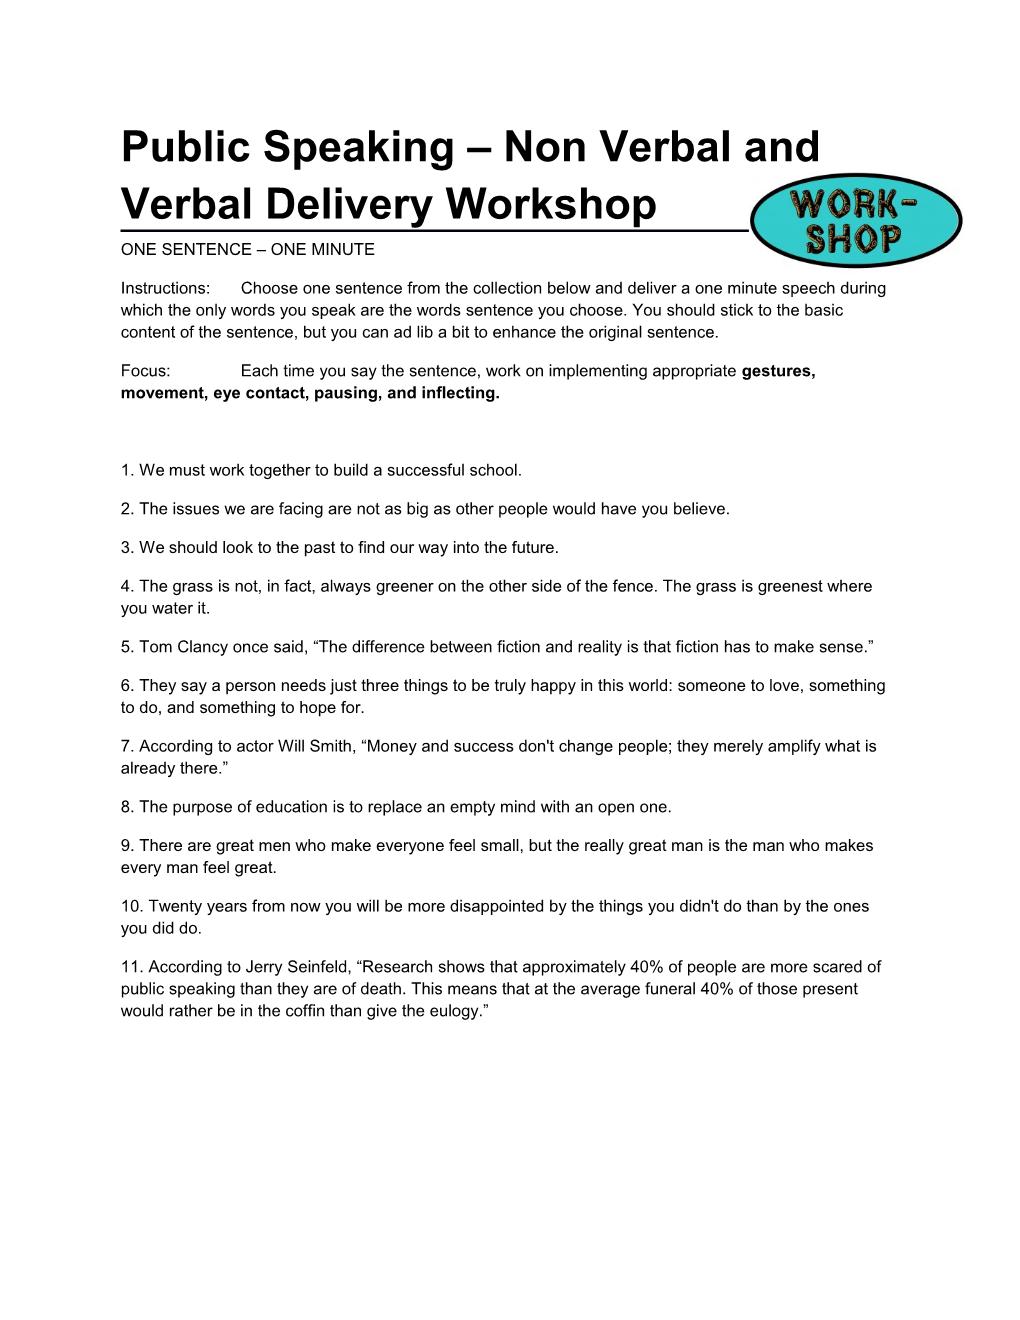 Public Speaking Non Verbal and Verbal Delivery Workshop